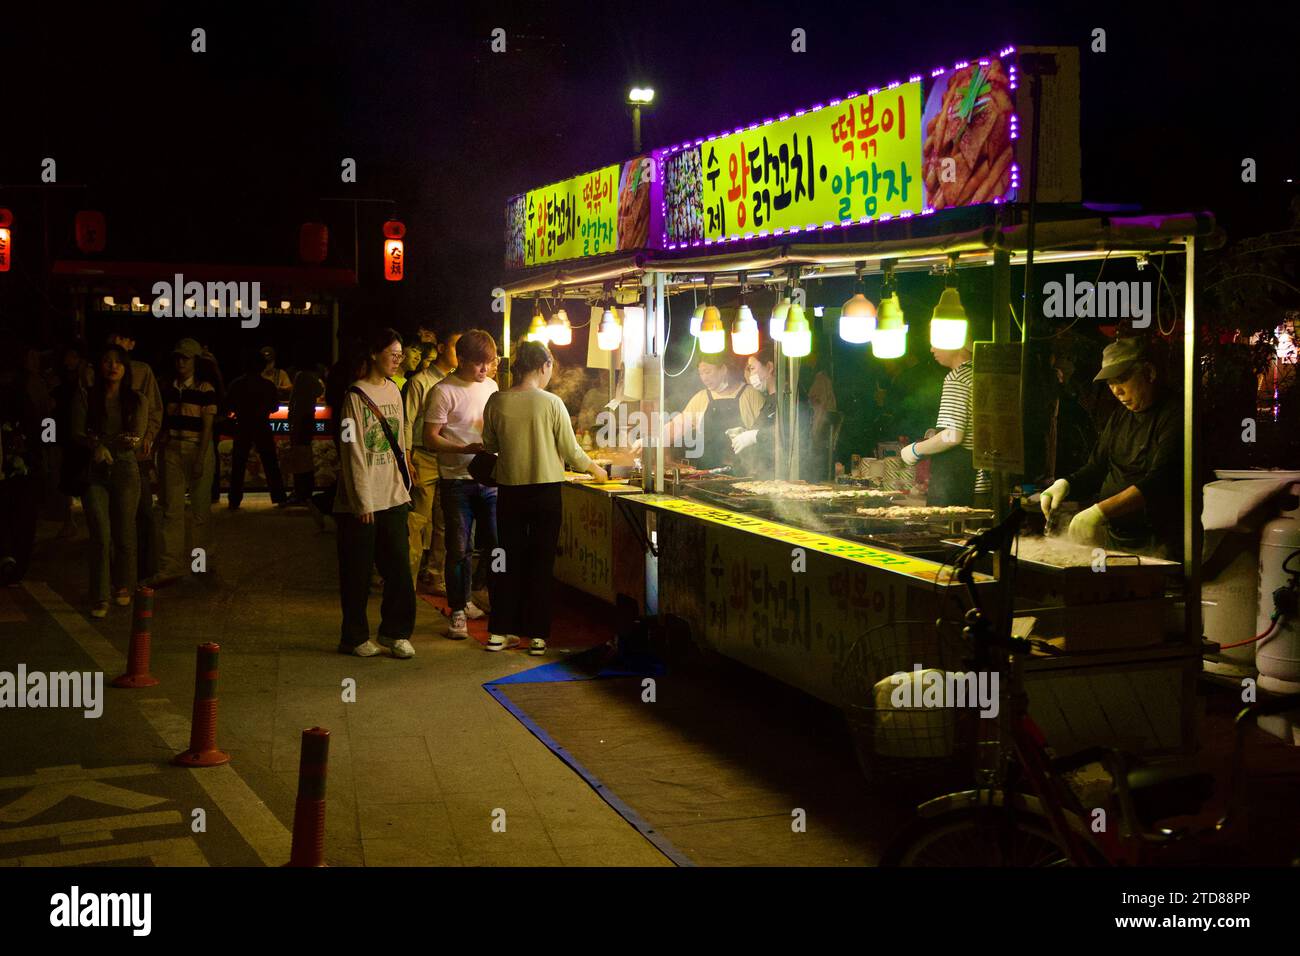 Seoul, South Korea - June 3, 2023: Under twinkling lightbulbs, a food cart in Yeouido Hangang Park comes alive at night, serving delicious street food Stock Photo